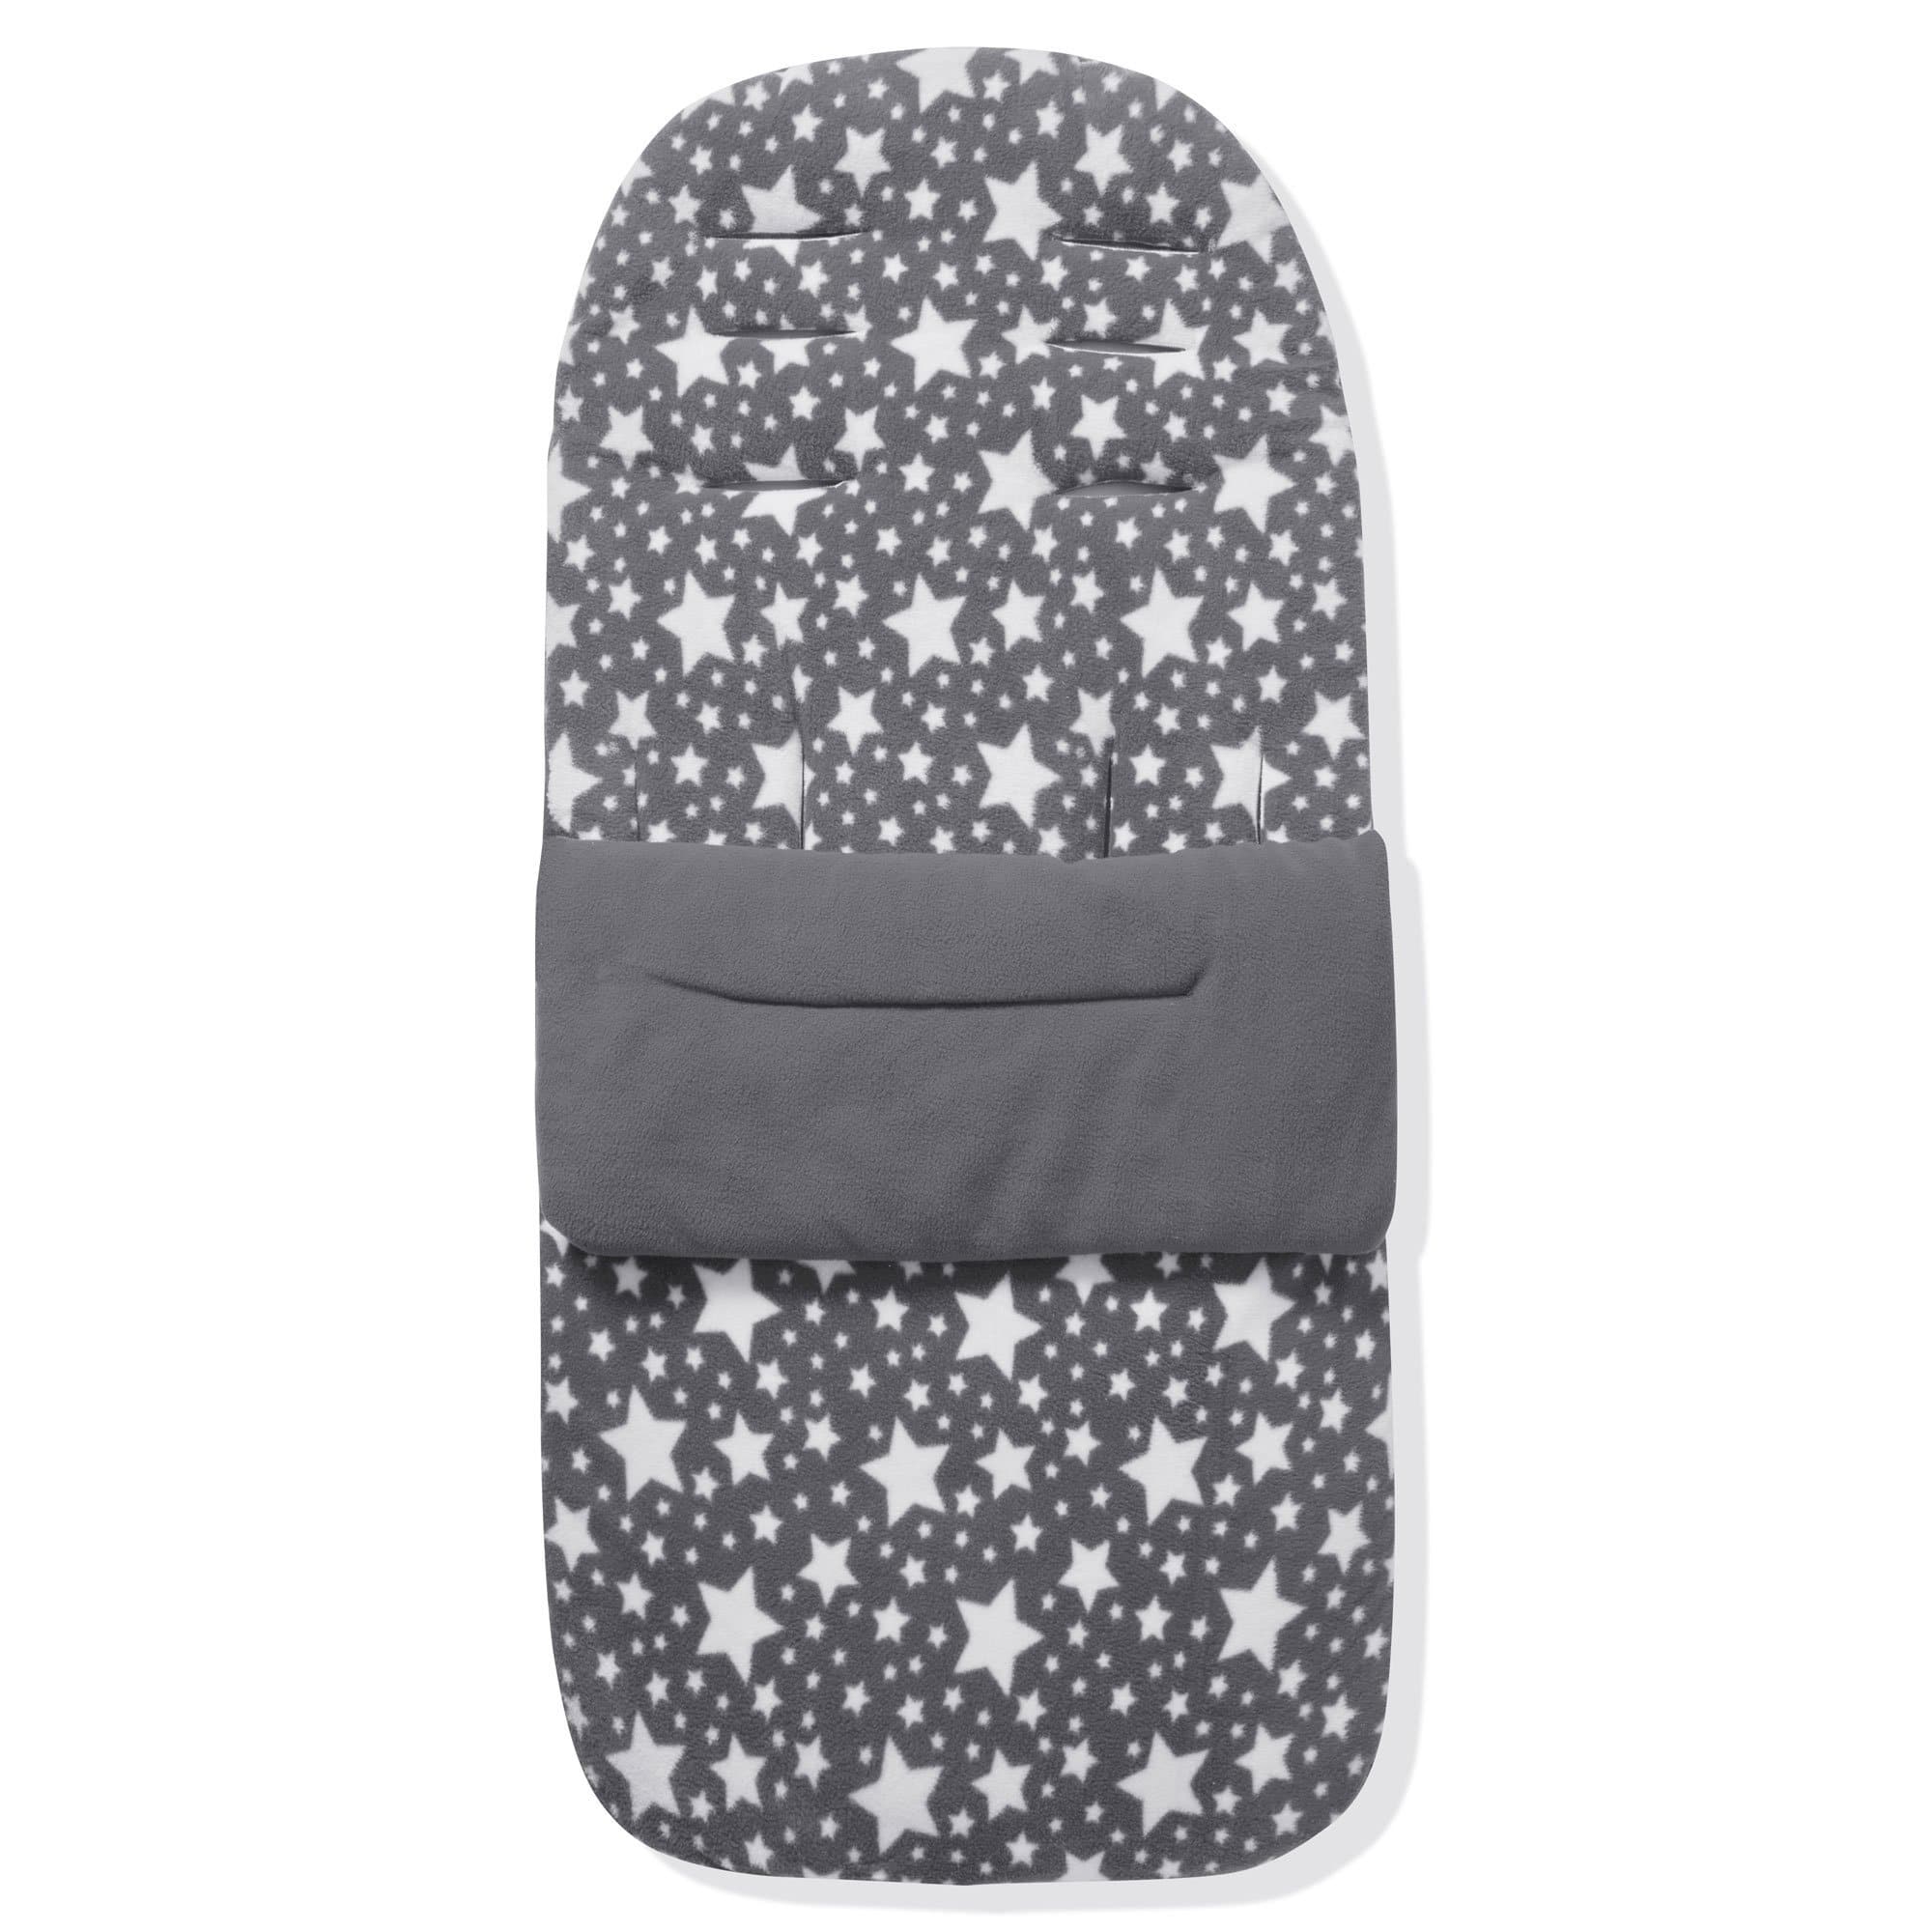 Fleece Footmuff / Cosy Toes Compatible with Joie - Grey Star / Fits All Models | For Your Little One